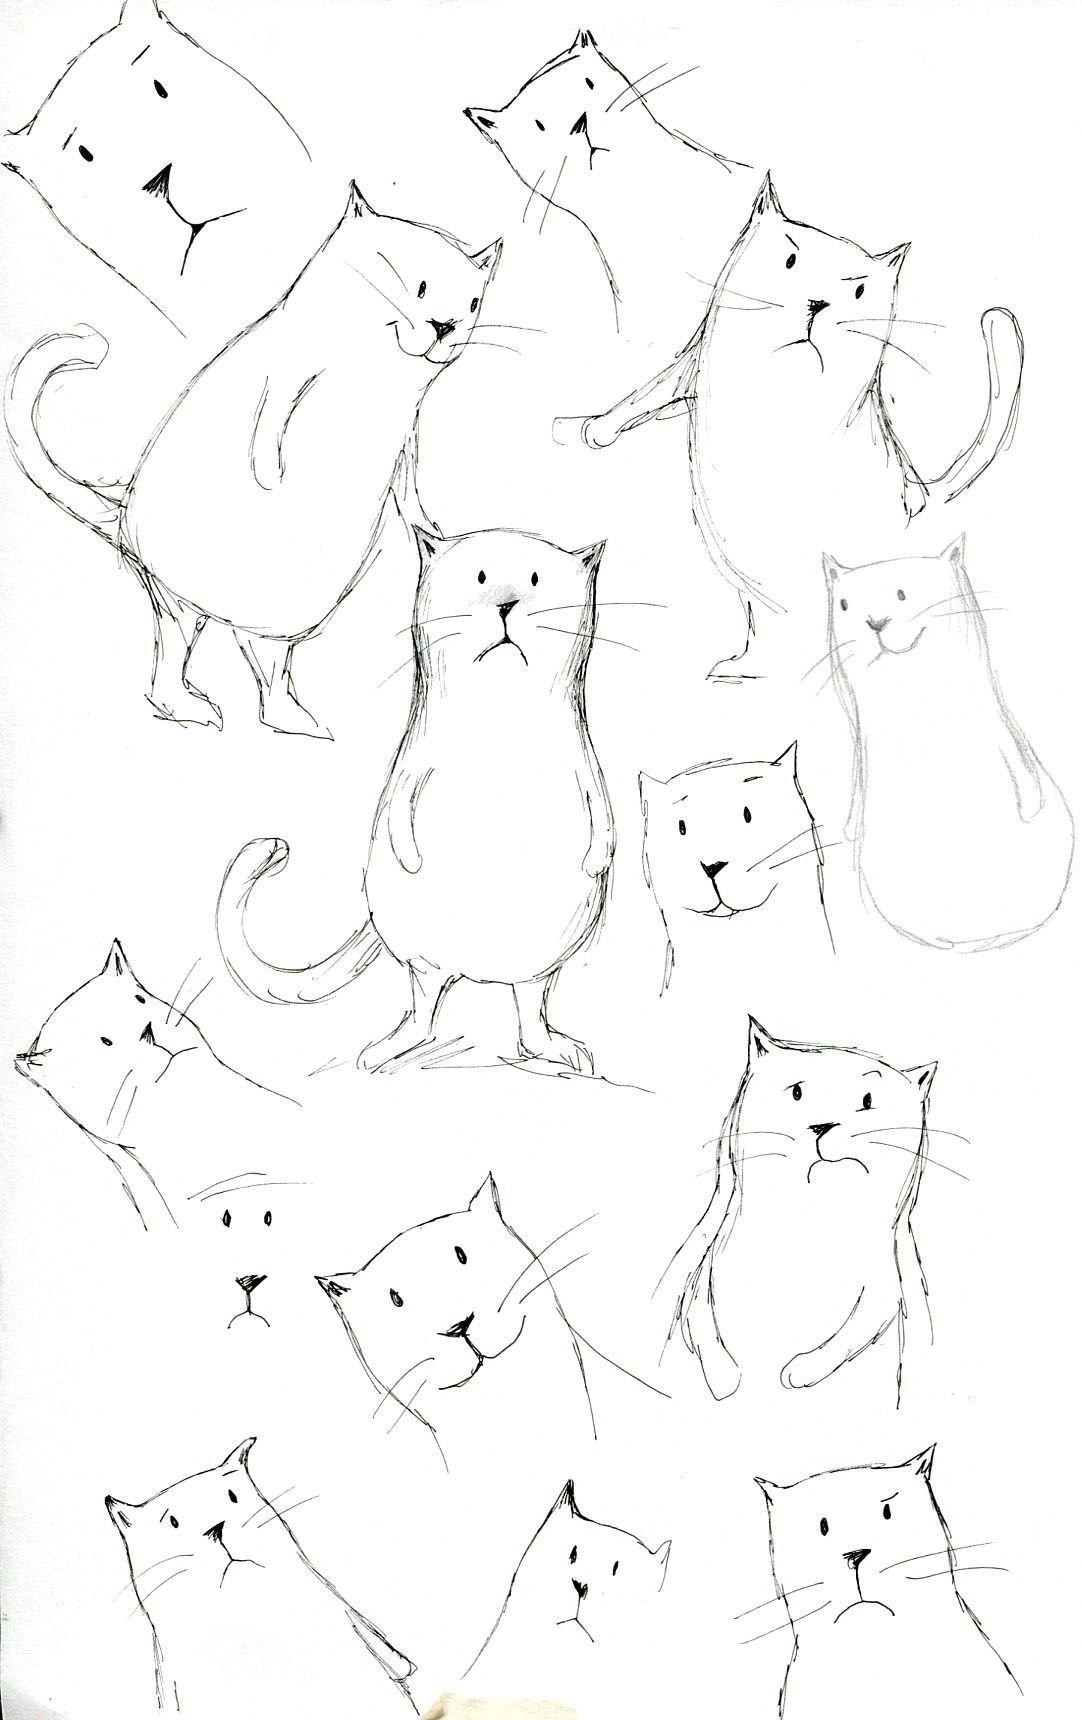 Here Comes the Easter Cat, Preliminary sketches by Claudia Rueda copyright ©, 2014